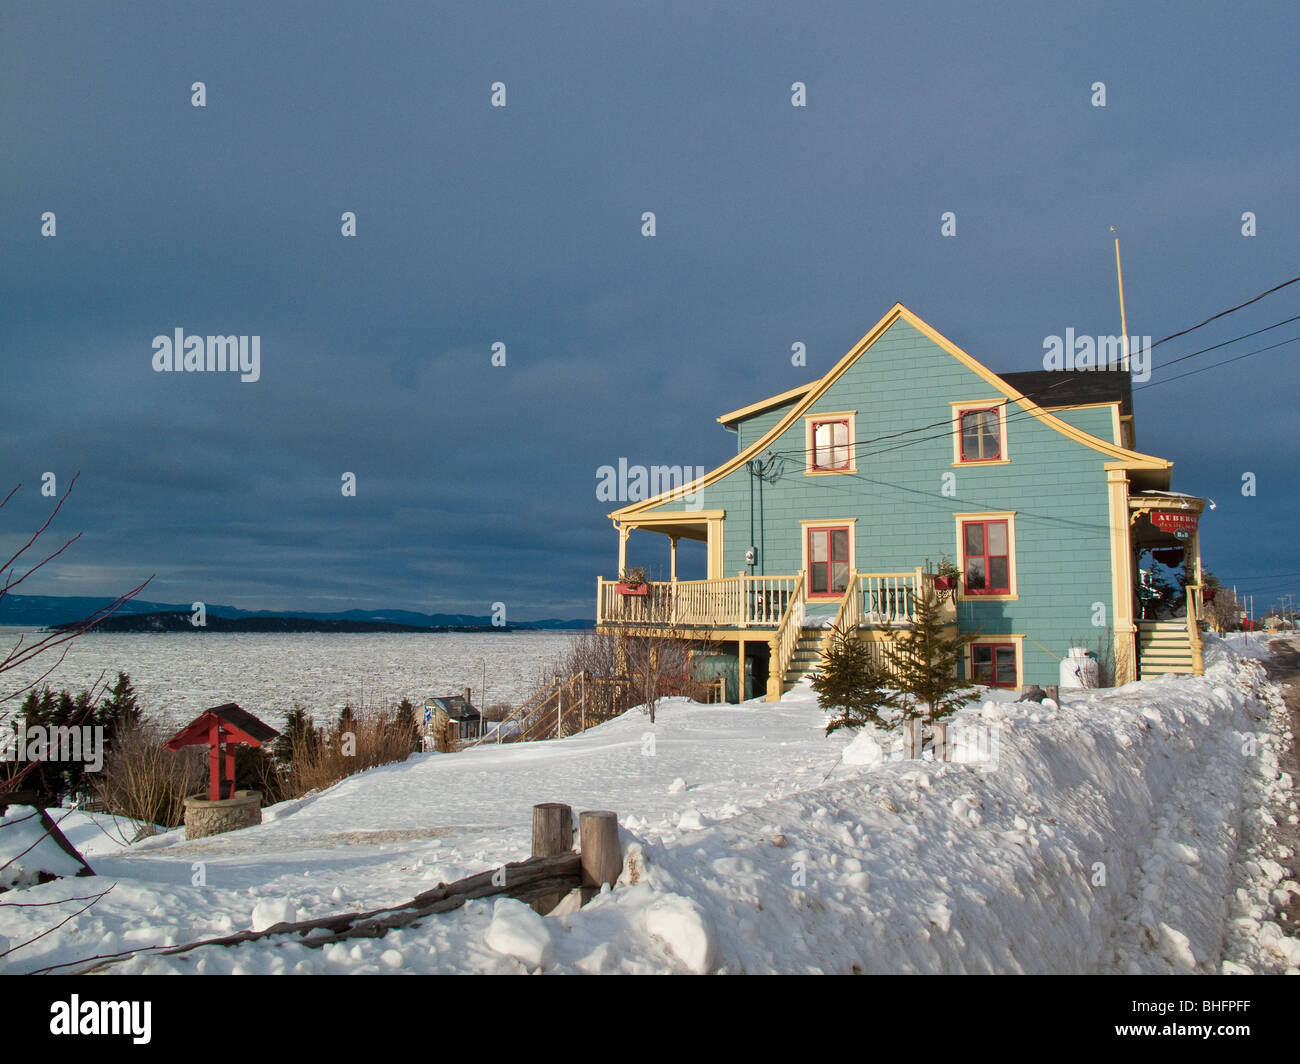 Kamouraska quebec in winter time with snow and frozen st. lawerence river Stock Photo